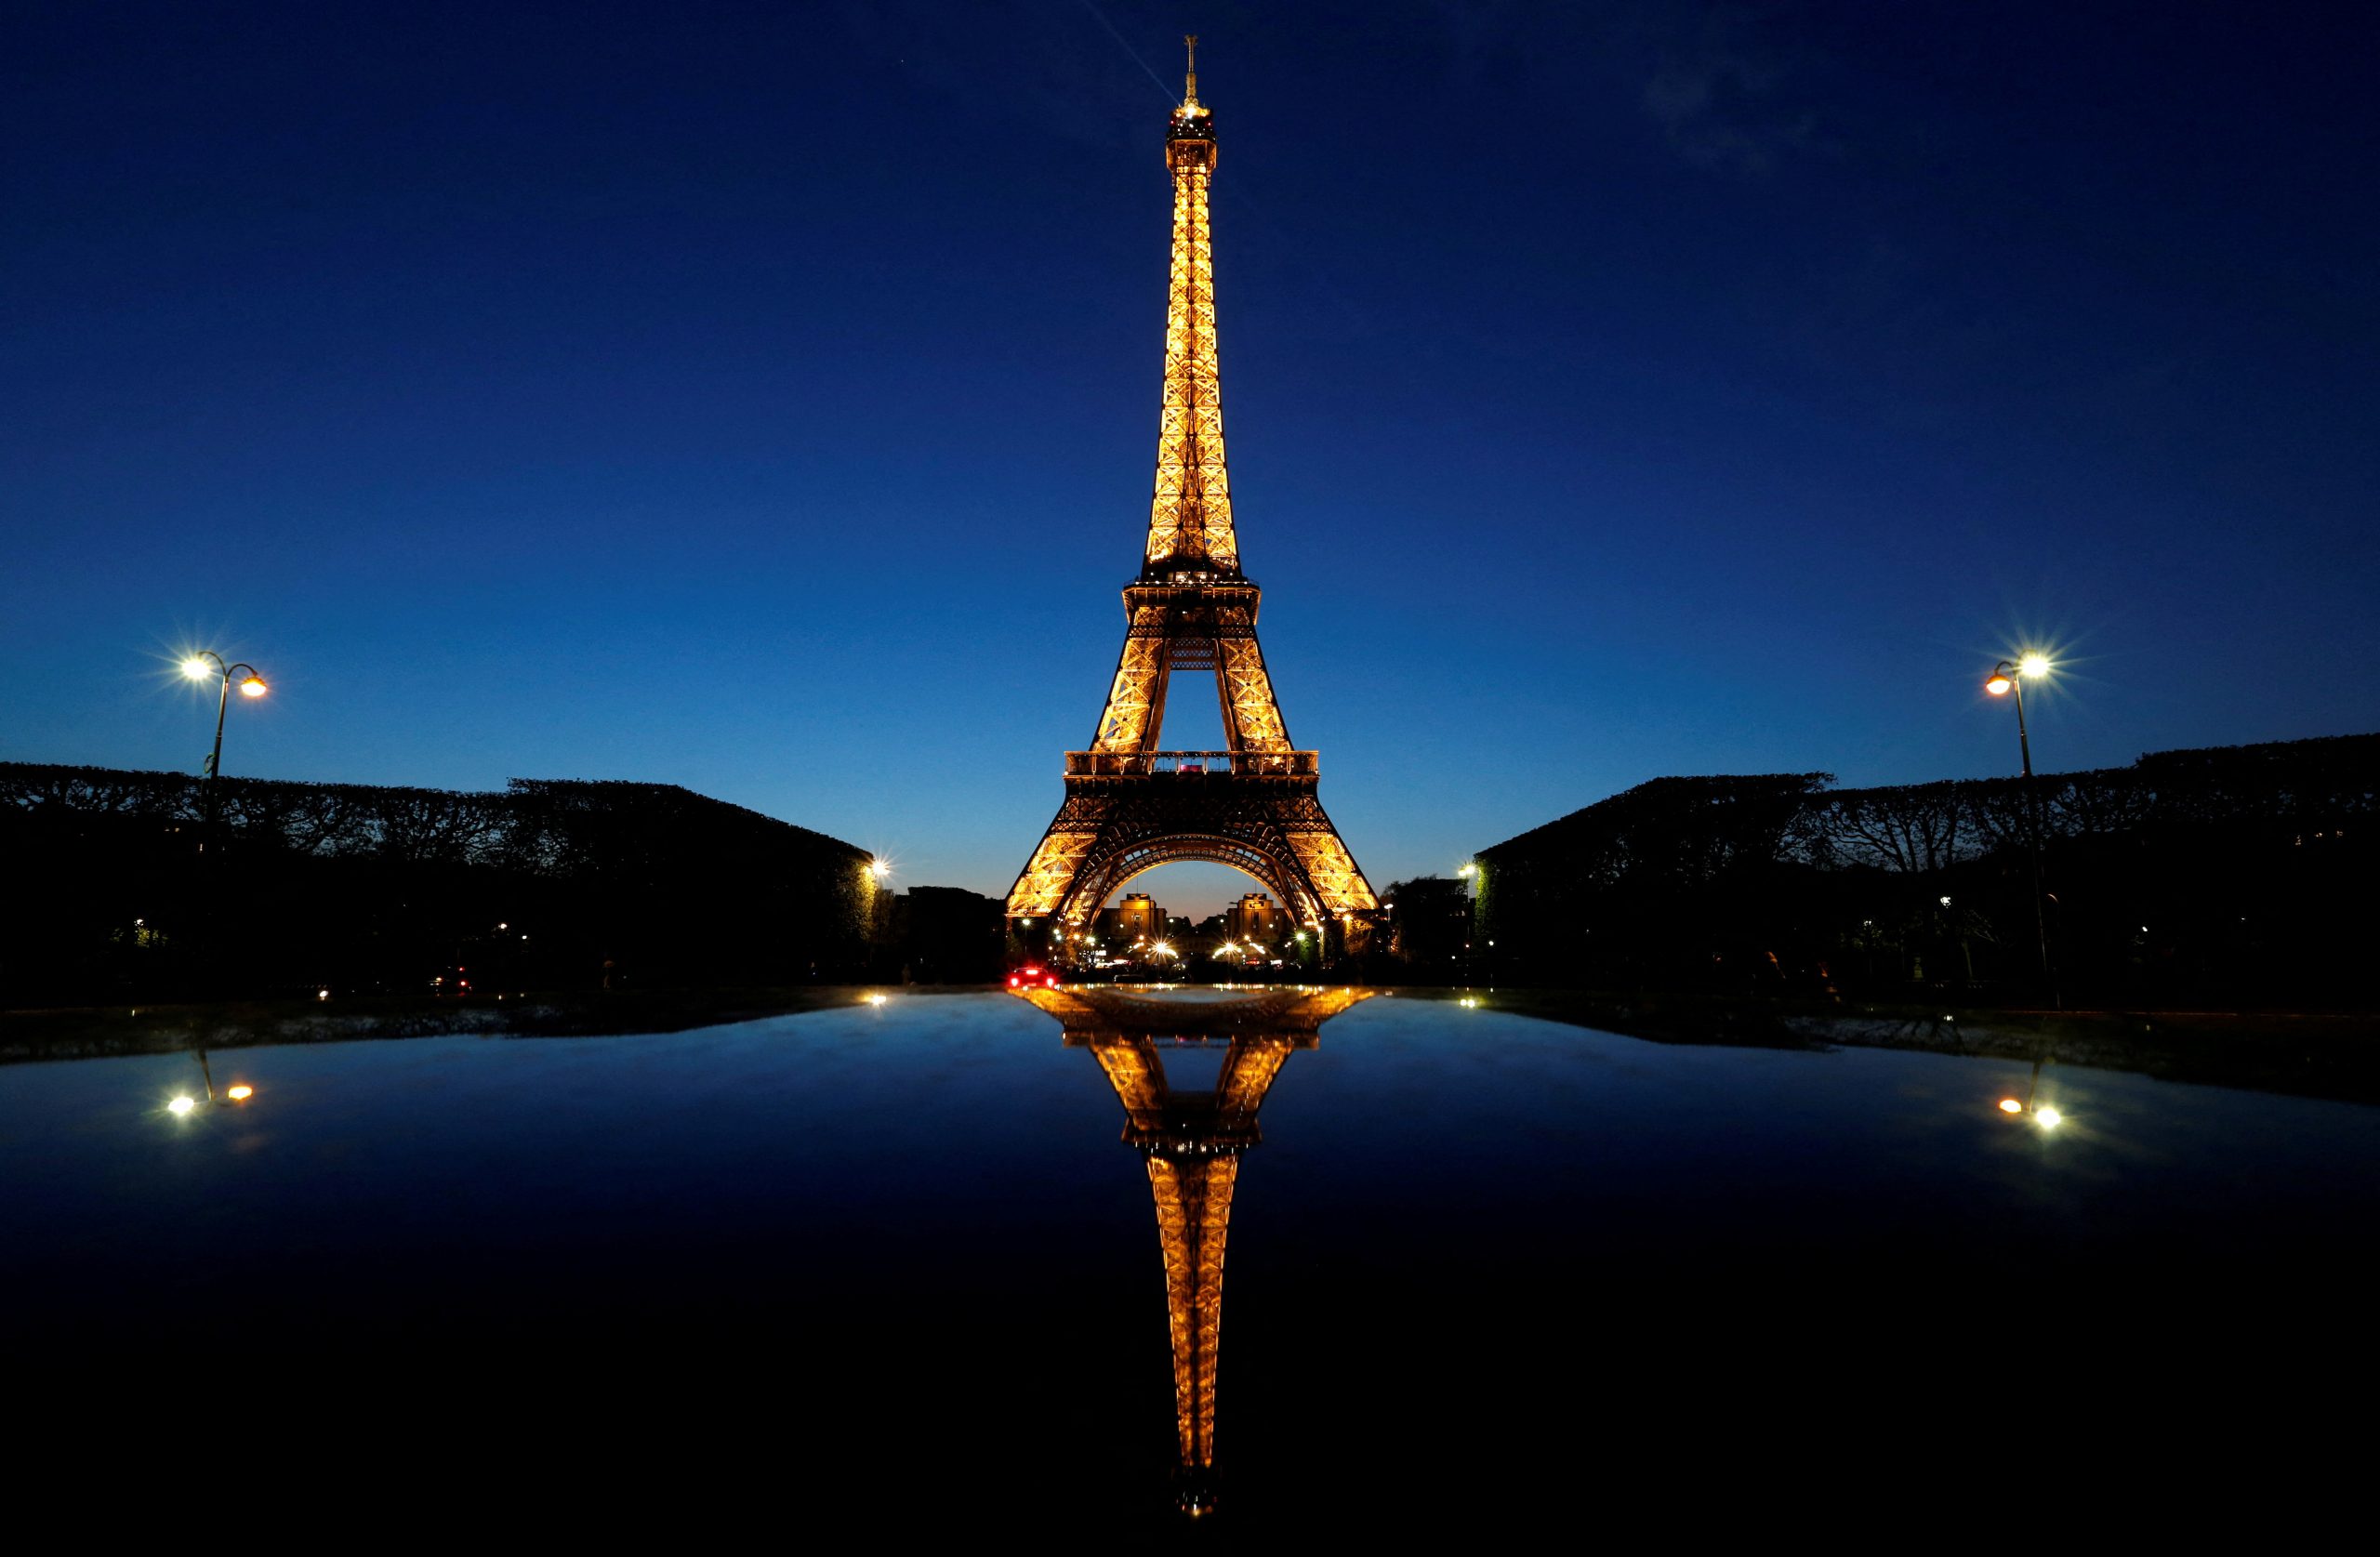 FILE PHOTO: A night view shows the Eiffel tower, reflected in a car’s roof, in Paris, France, April 30, 2016. REUTERS/Christian Hartmann/File Photo